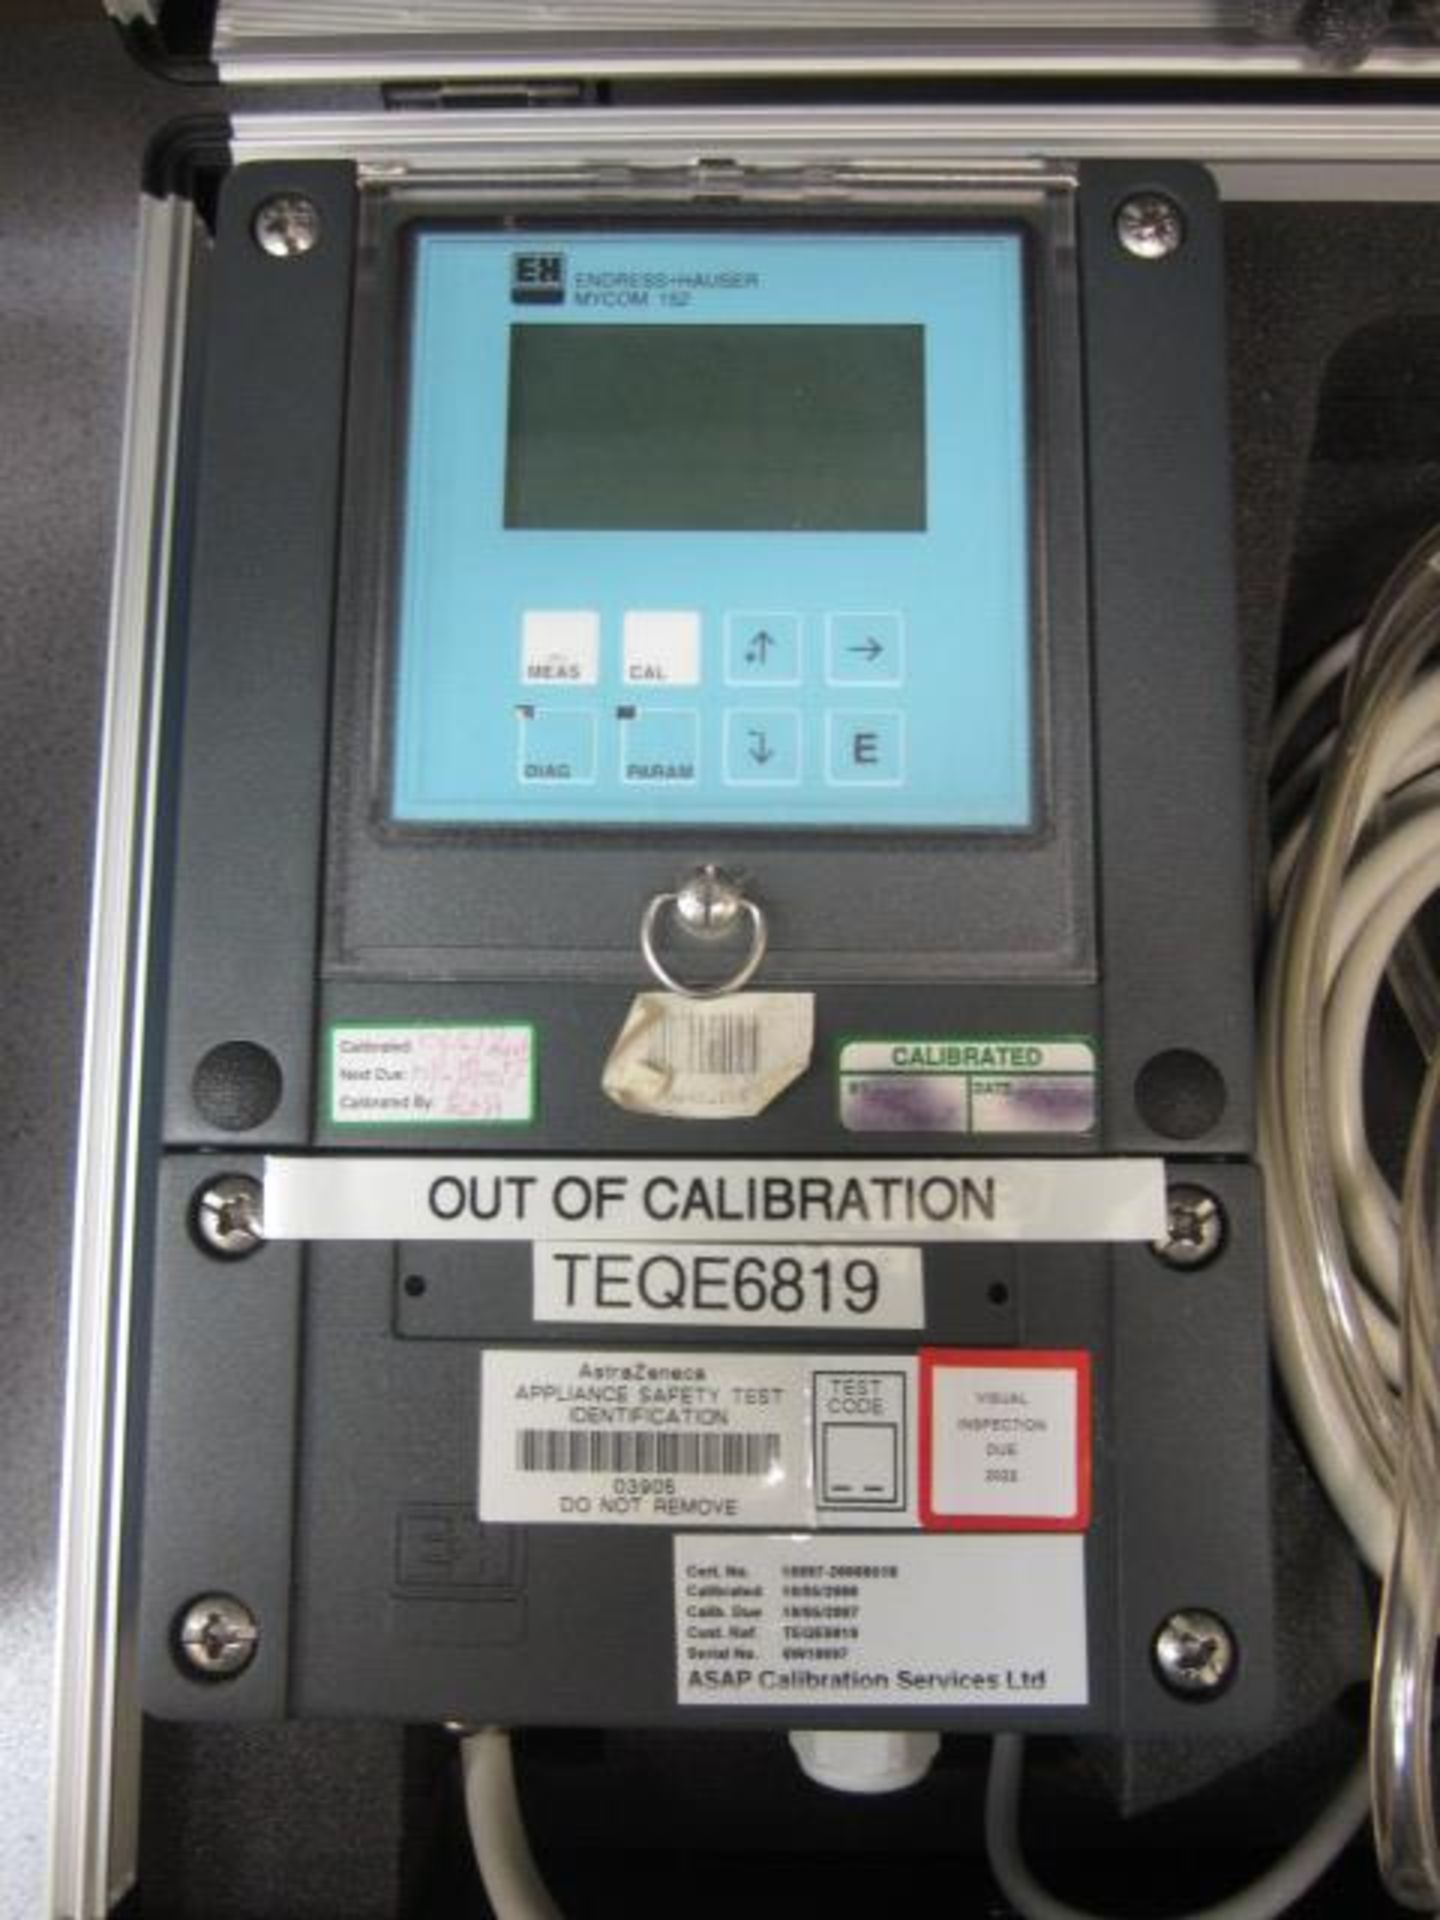 Endress Hauser Mycom 152 conceal conductivity calibration set for ultra pure water applications, - Image 2 of 4